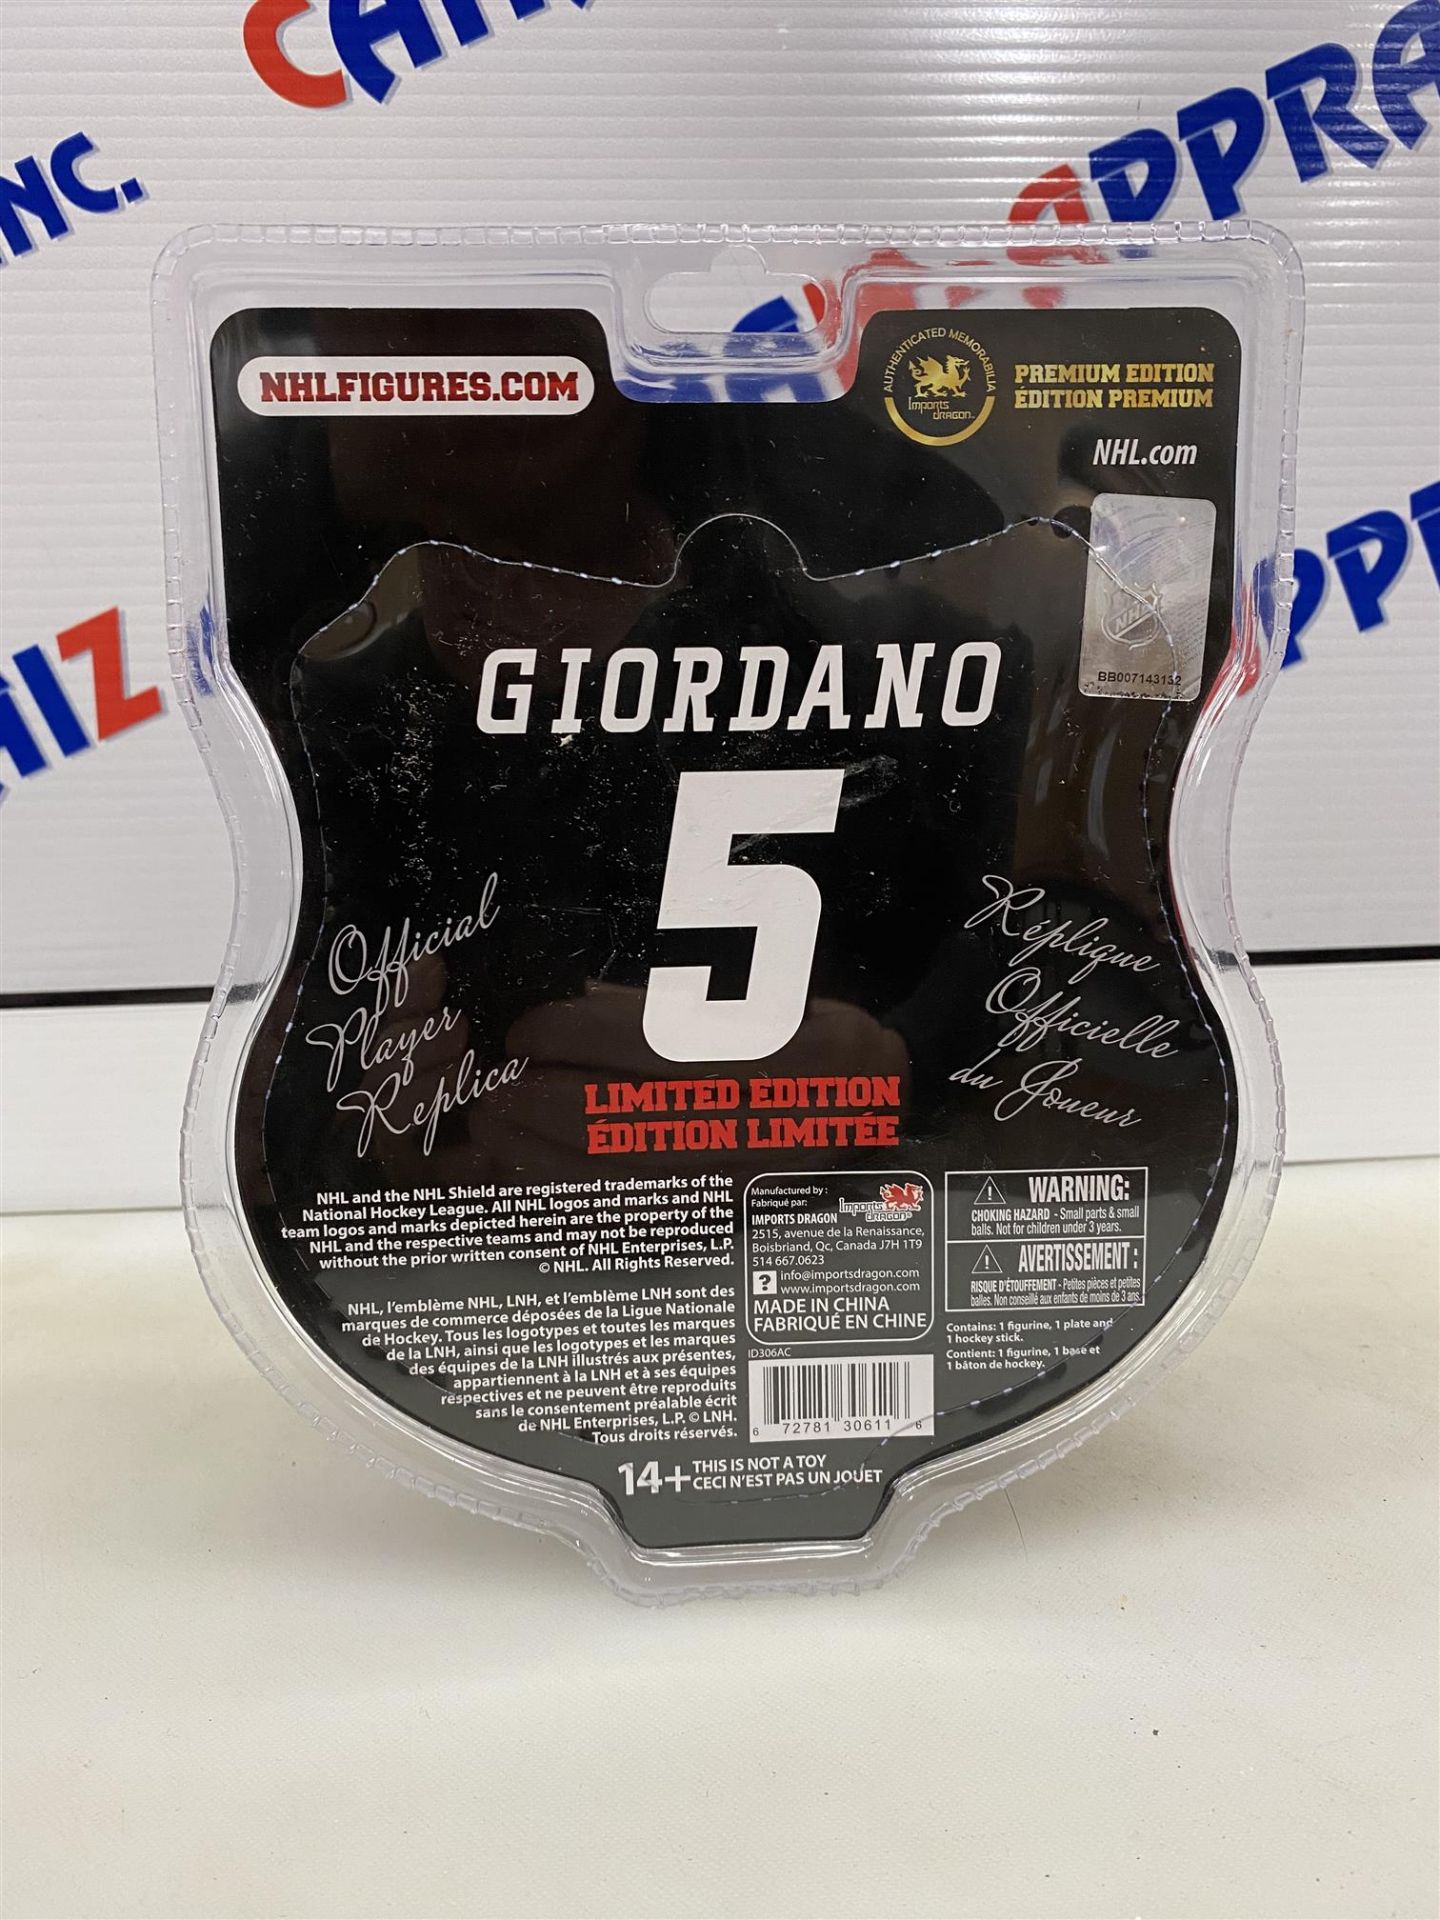 Limited Edition NHL-pa- (Player Figure) CALGARY FLAMES - GIORDANO 5 - Image 2 of 2